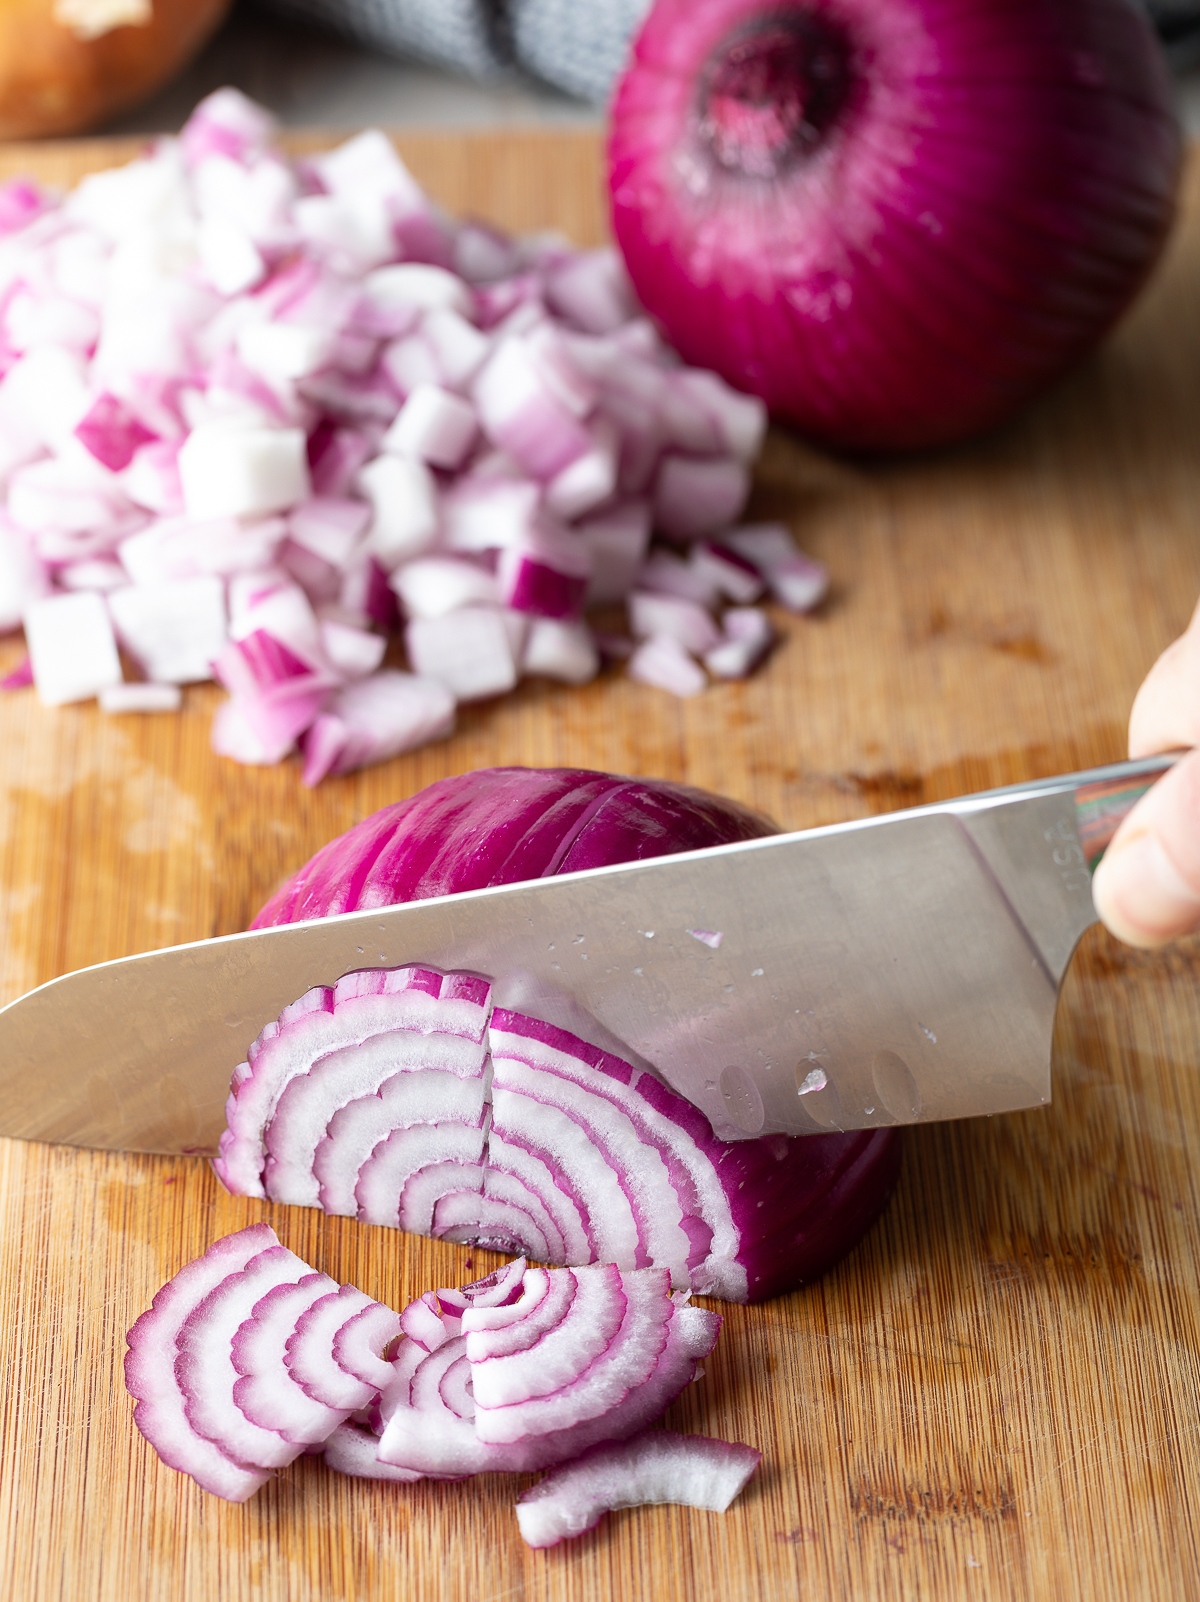 How to Chop and Slice an Onion